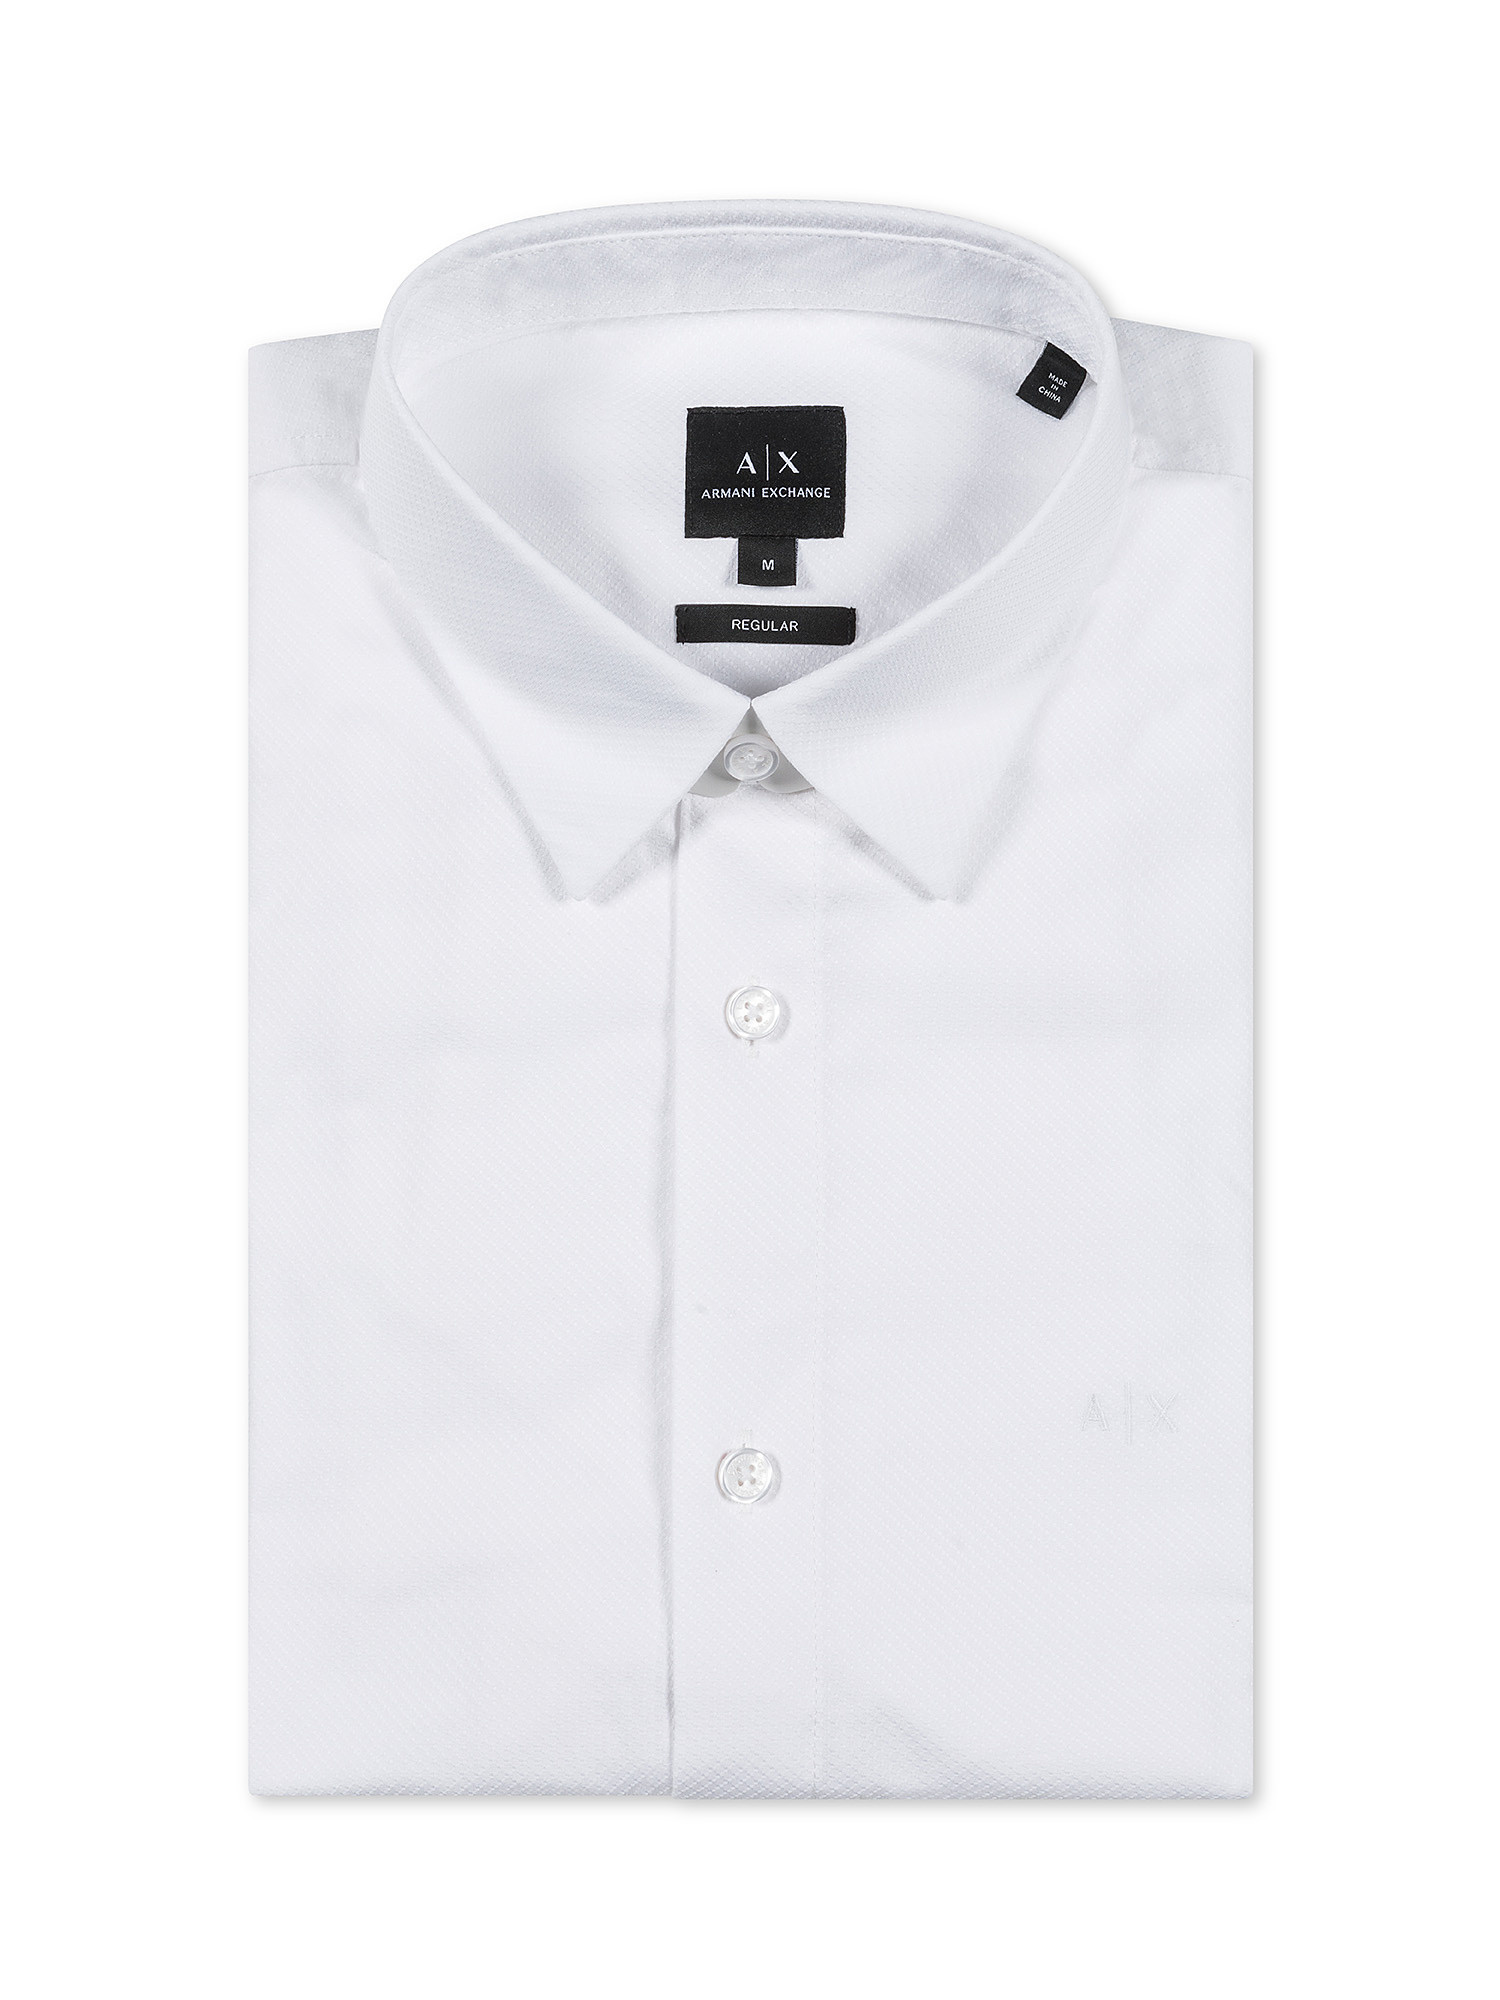 Armani Exchange - Camicia regular fit in cotone, Bianco, large image number 0